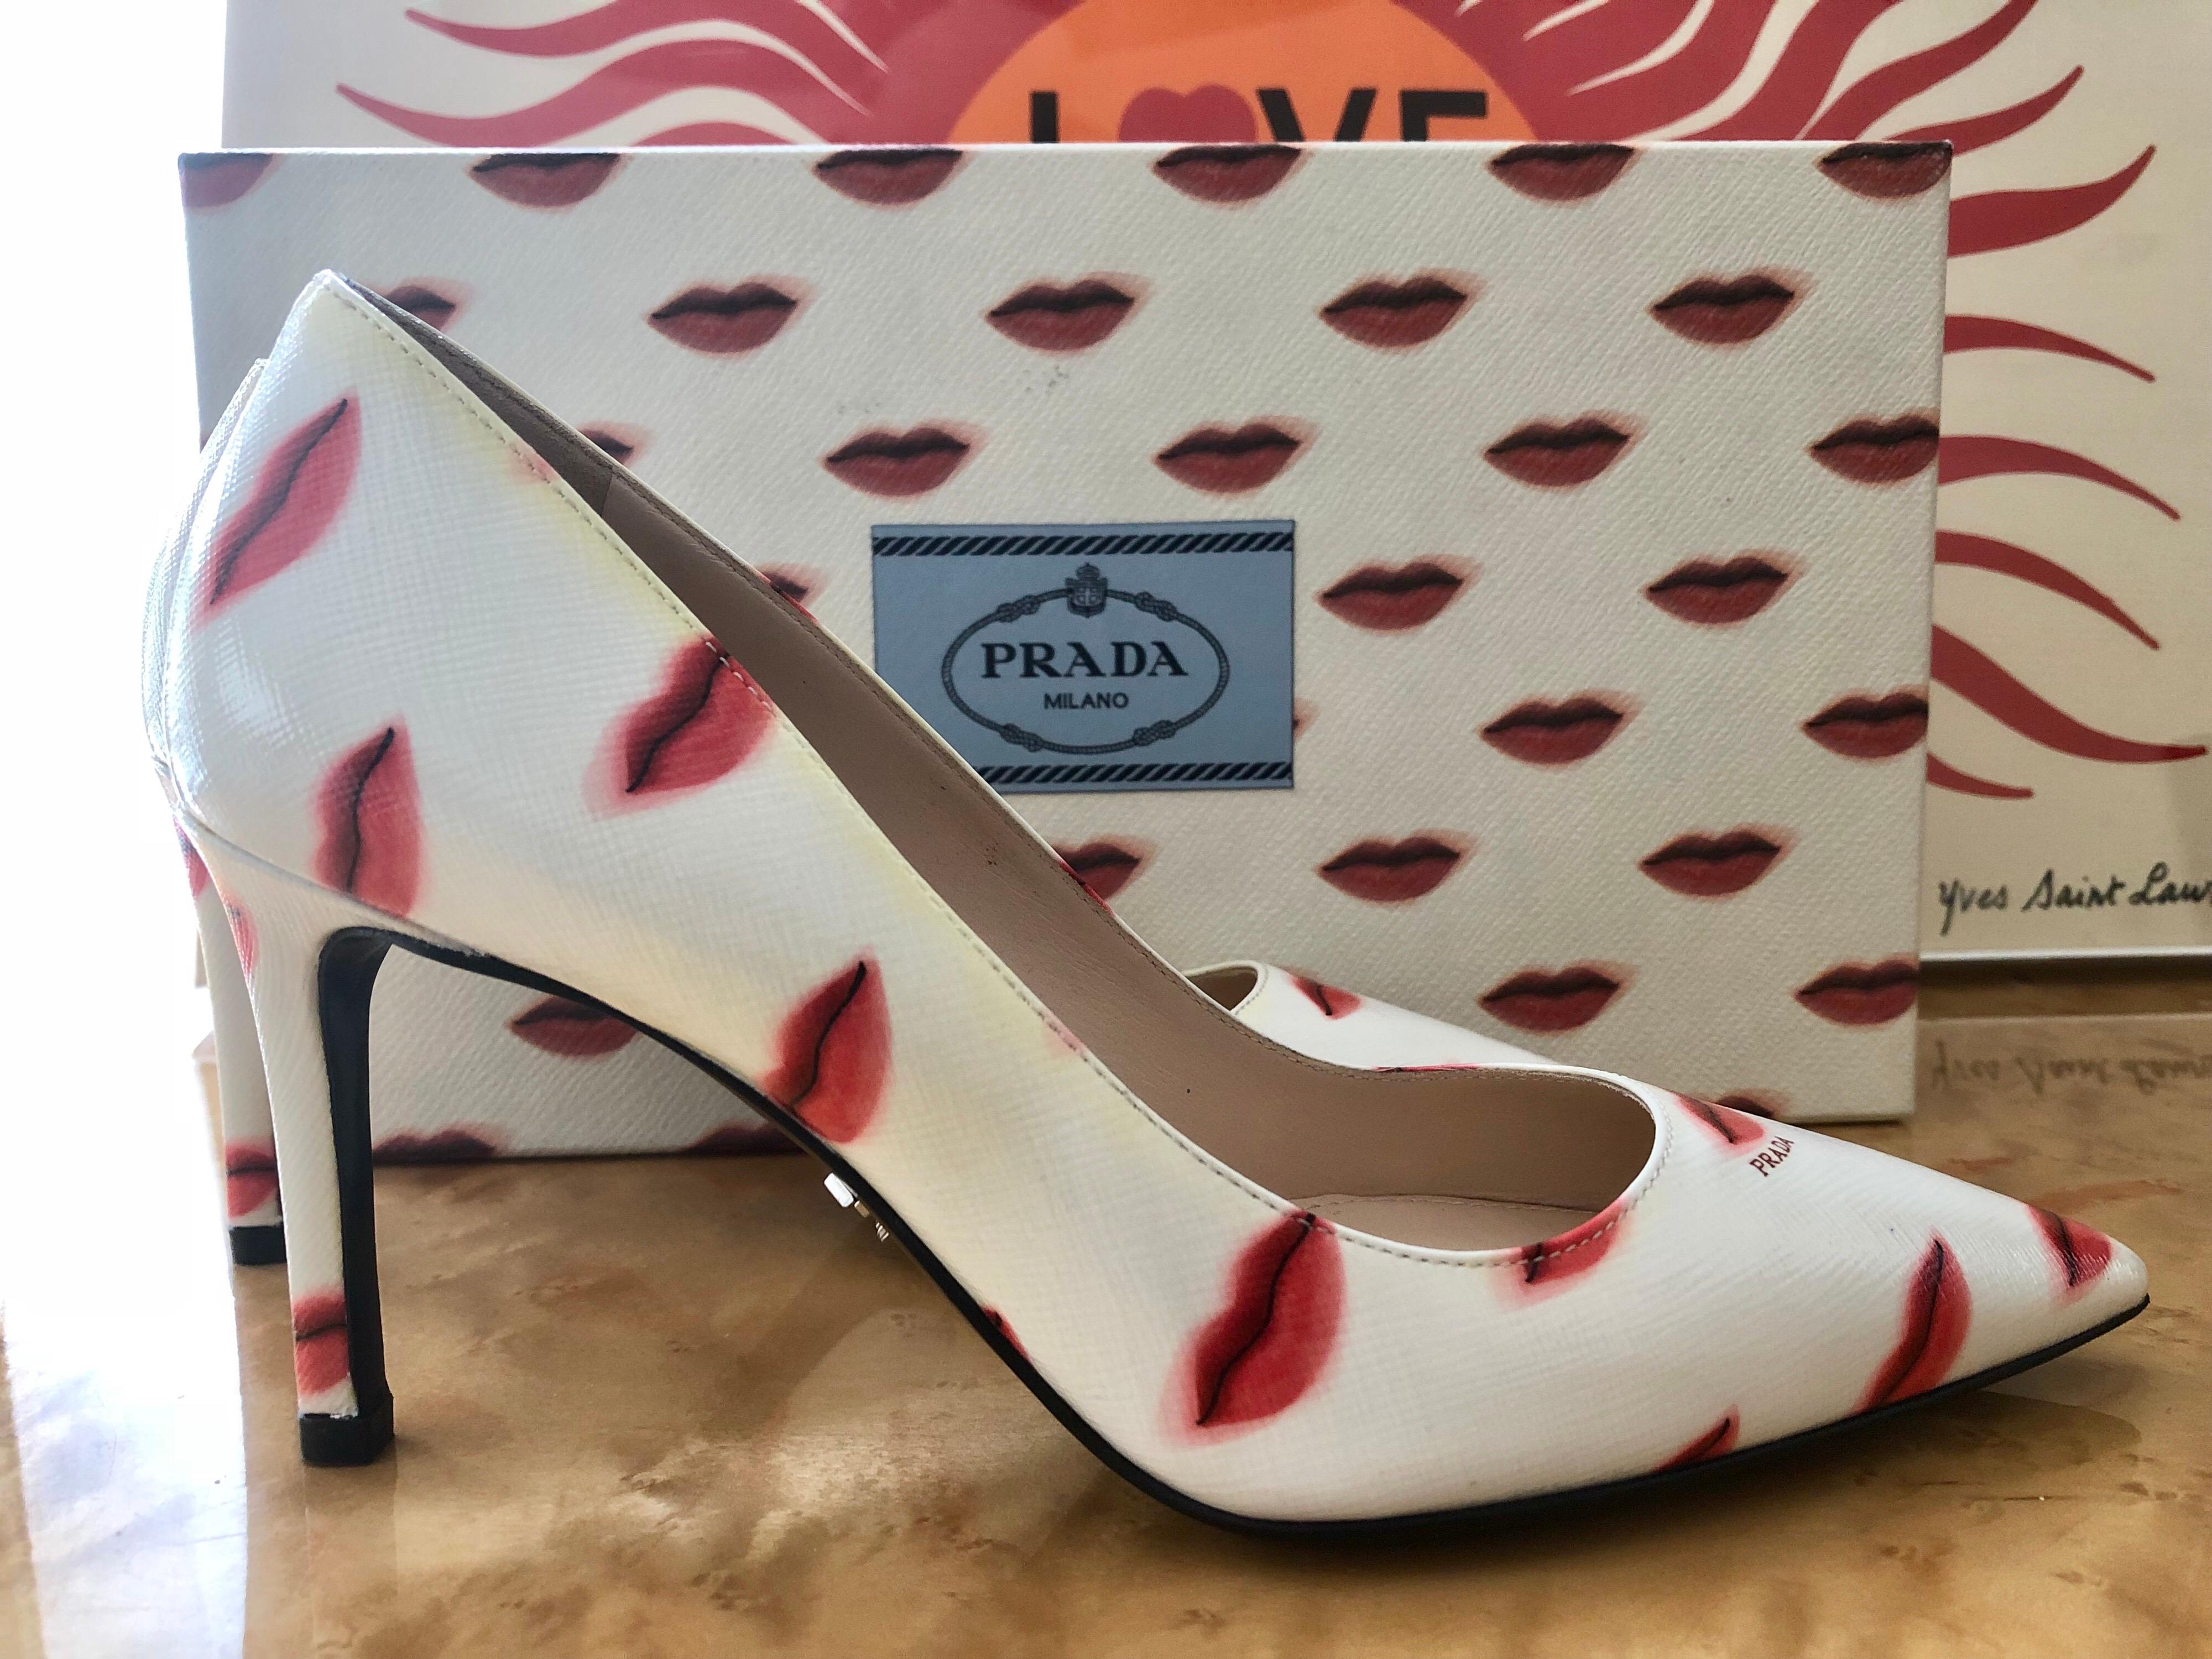 Iconic Prada lip print heels. 
Unworn, and comes with the collectable lip print shoe box. 
These shoes were special ordered at the Prada Made-To-Order Tour at Saks Fifth Avenue in 2016.

Size: 34.5 Italian, 4.5 U.S
Heels: 3 inches
Insole: about 9